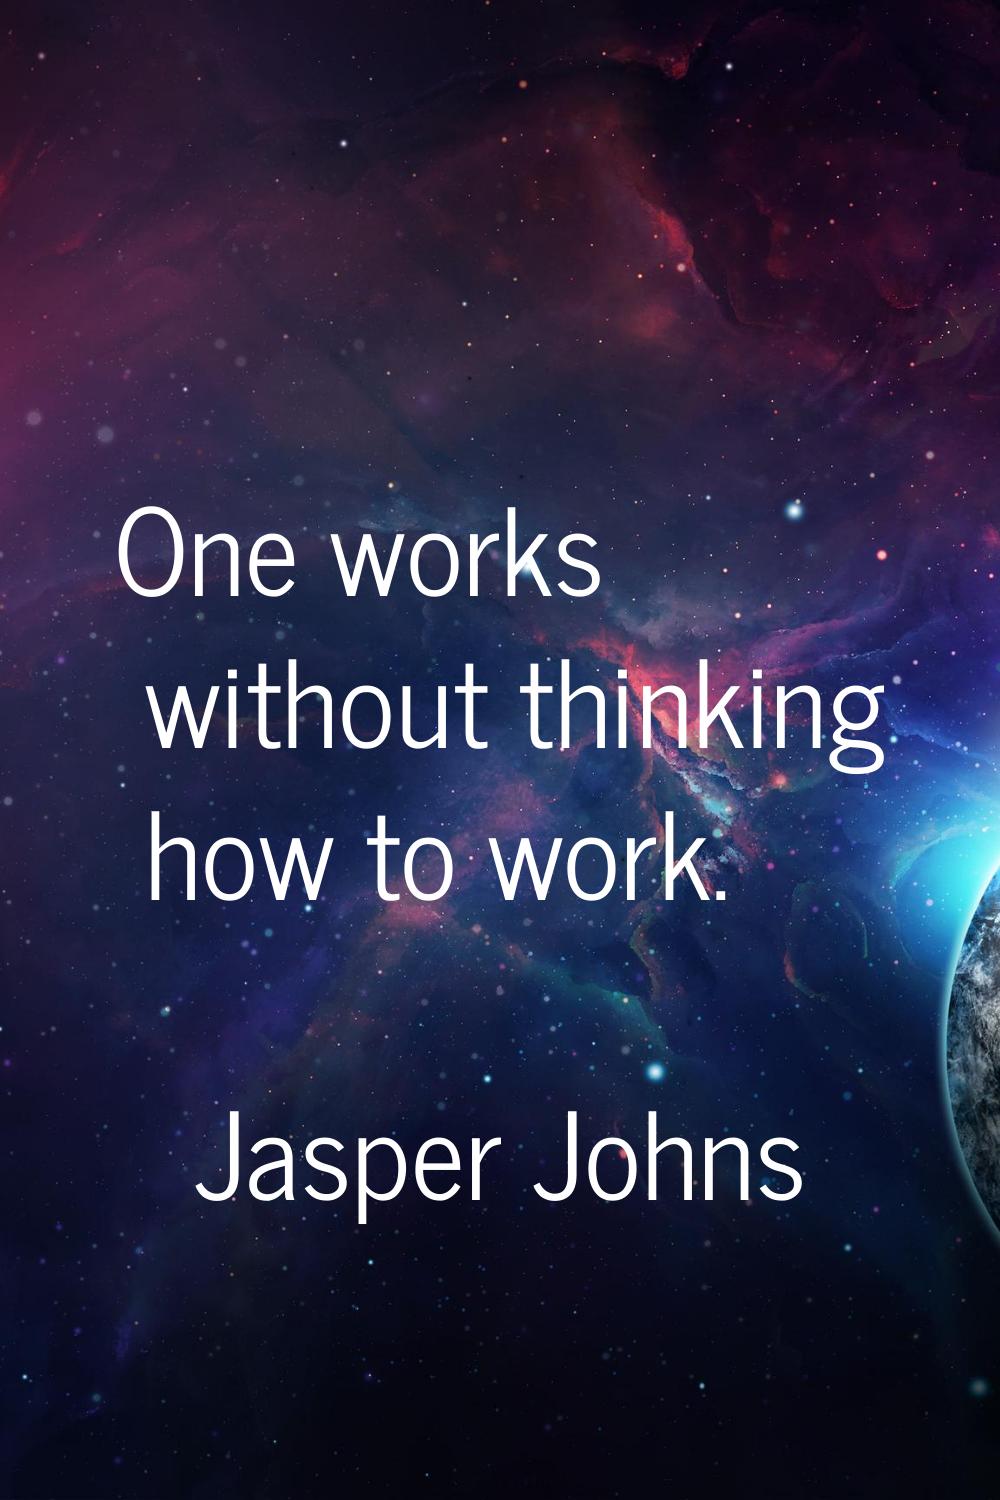 One works without thinking how to work.